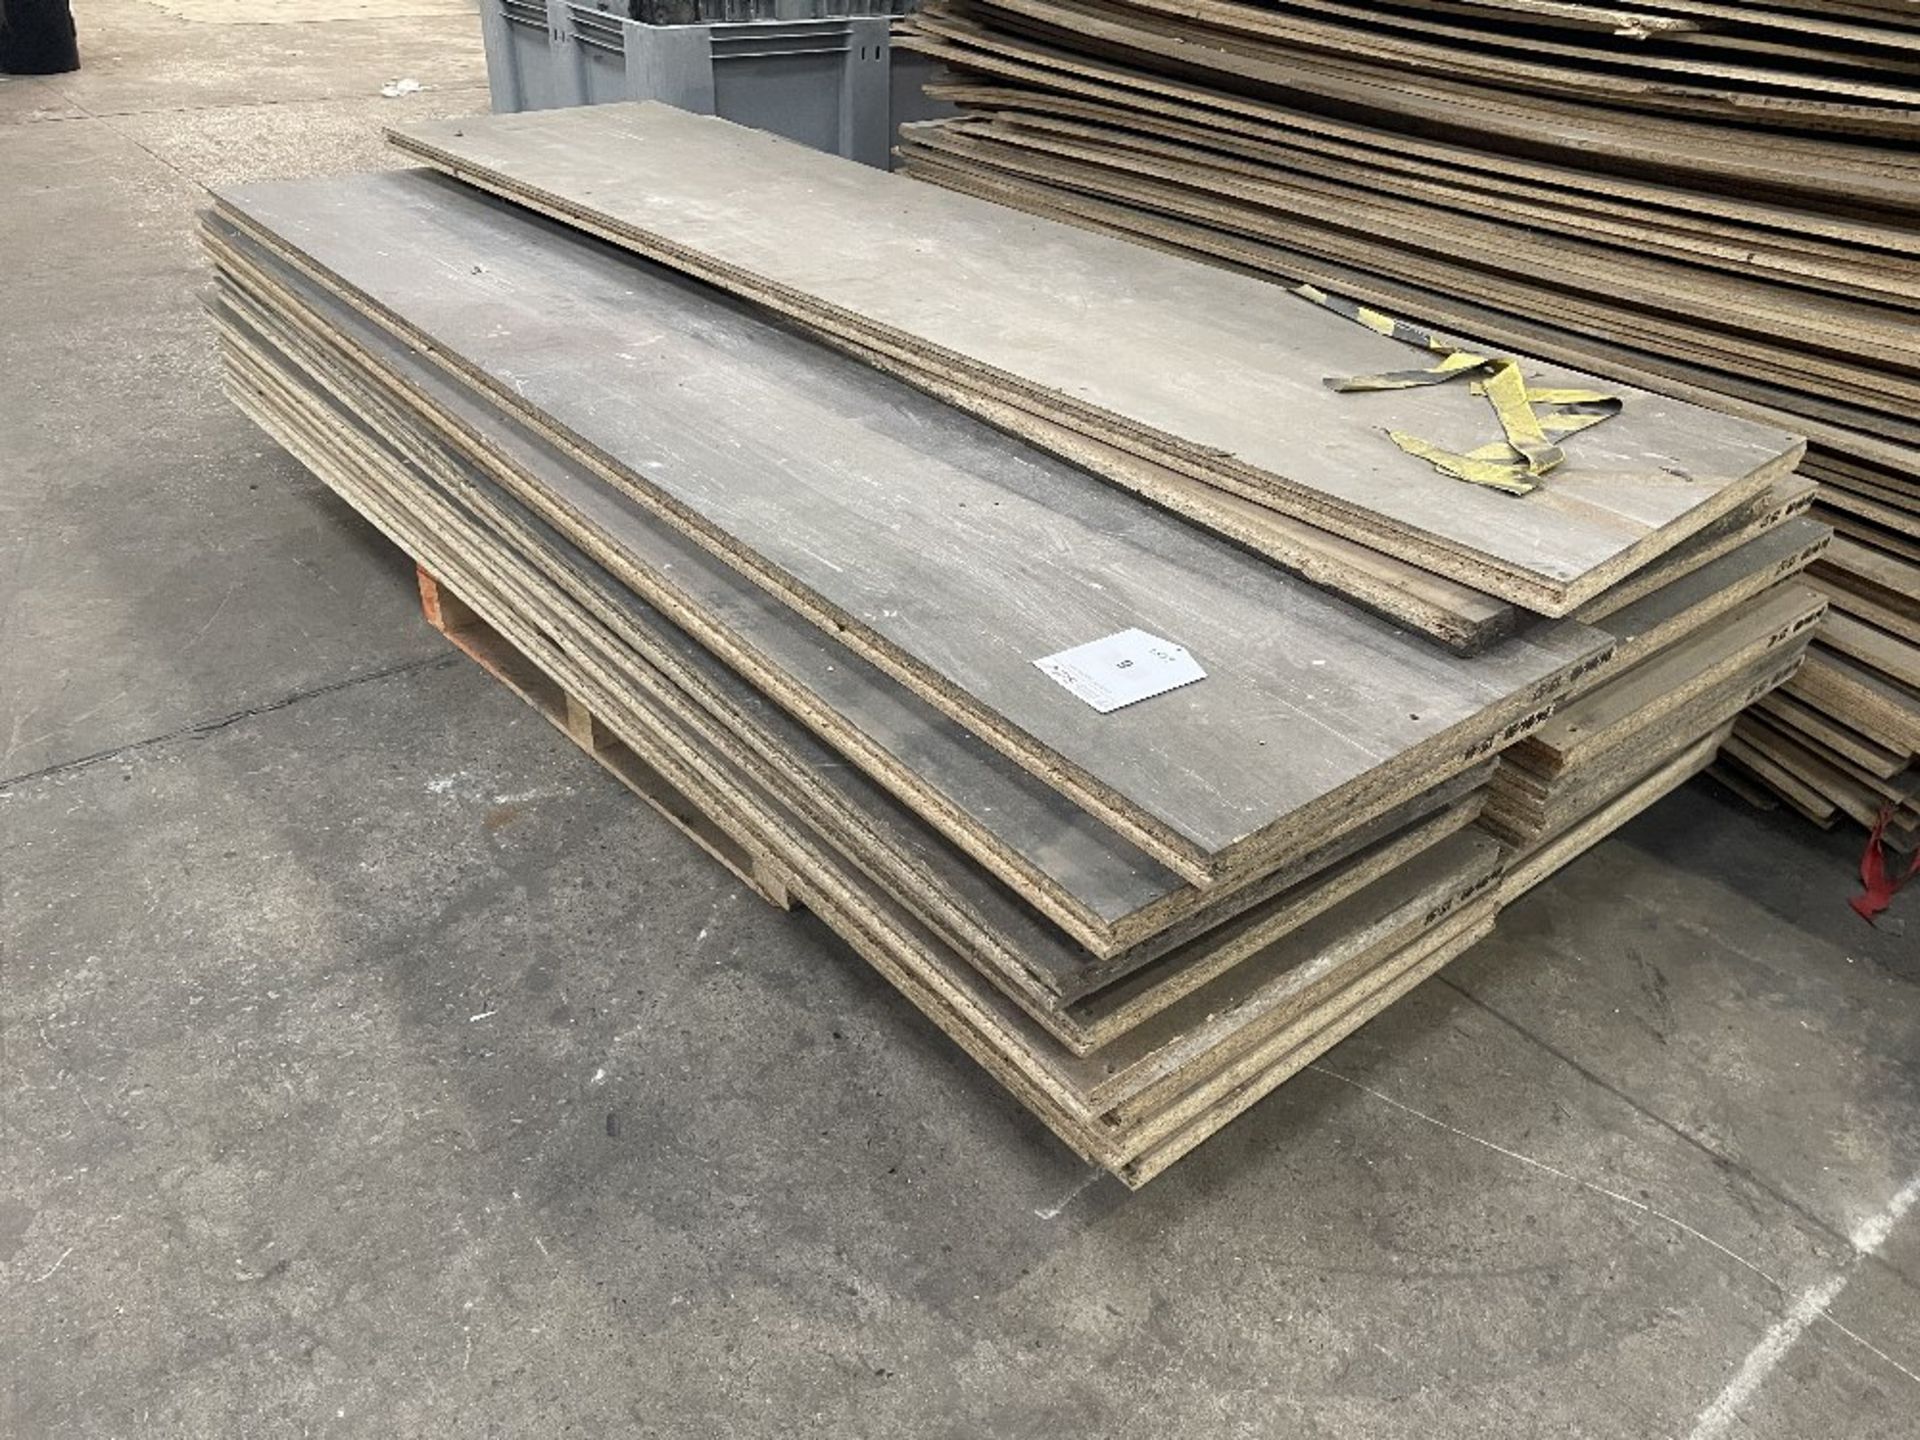 24 x Heavy Duty Tongue & Groove Chipboard Floorboards | 240cm x 60cm x 4cm - Image 3 of 5